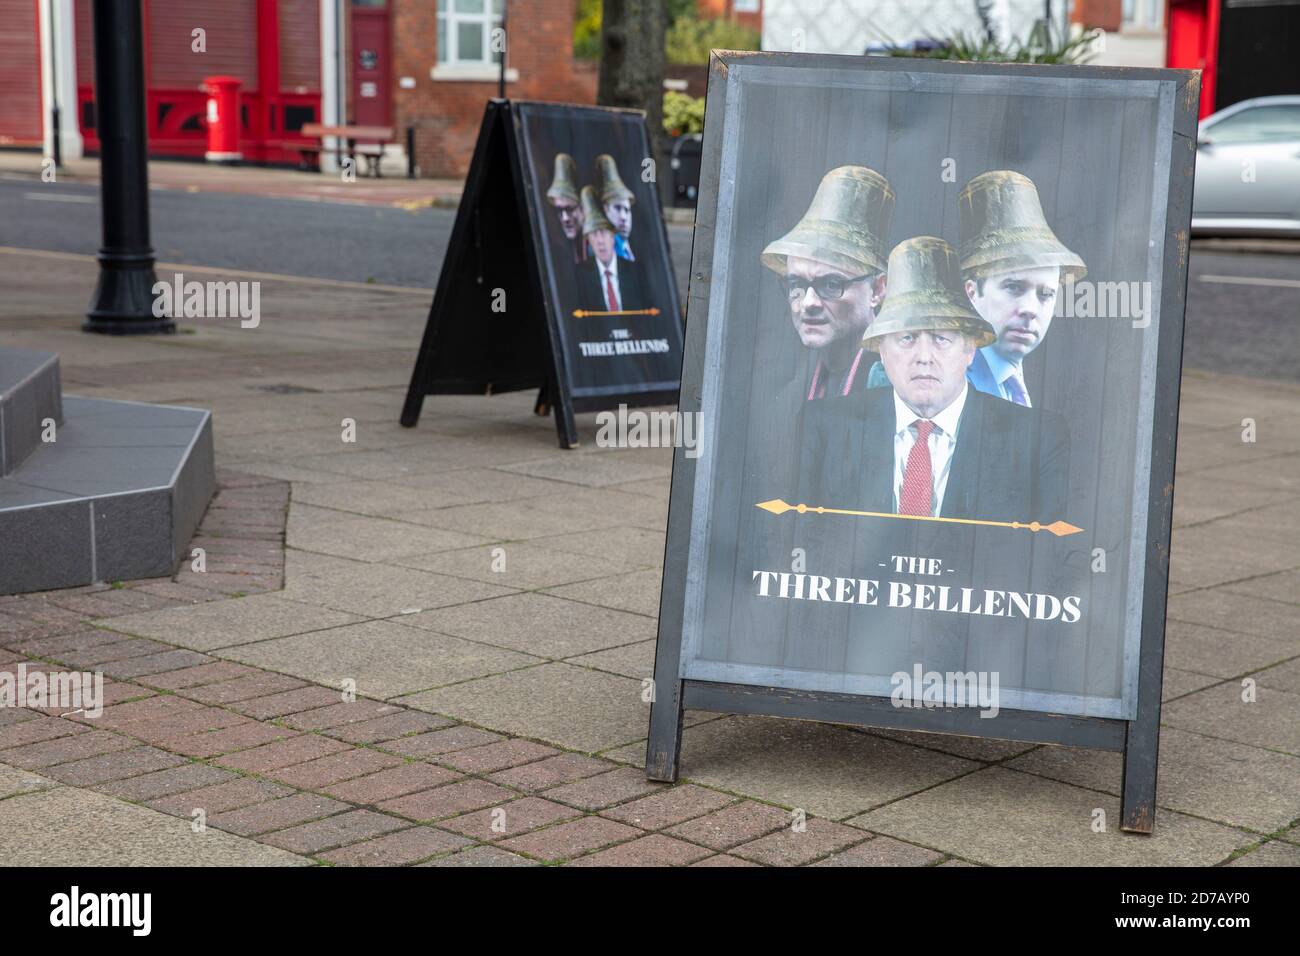 LIVERPOOL, UK - October 2020: The James Atherton Pub in Merseyside is re-named The Three Bellends in protest against the UK Government Stock Photo